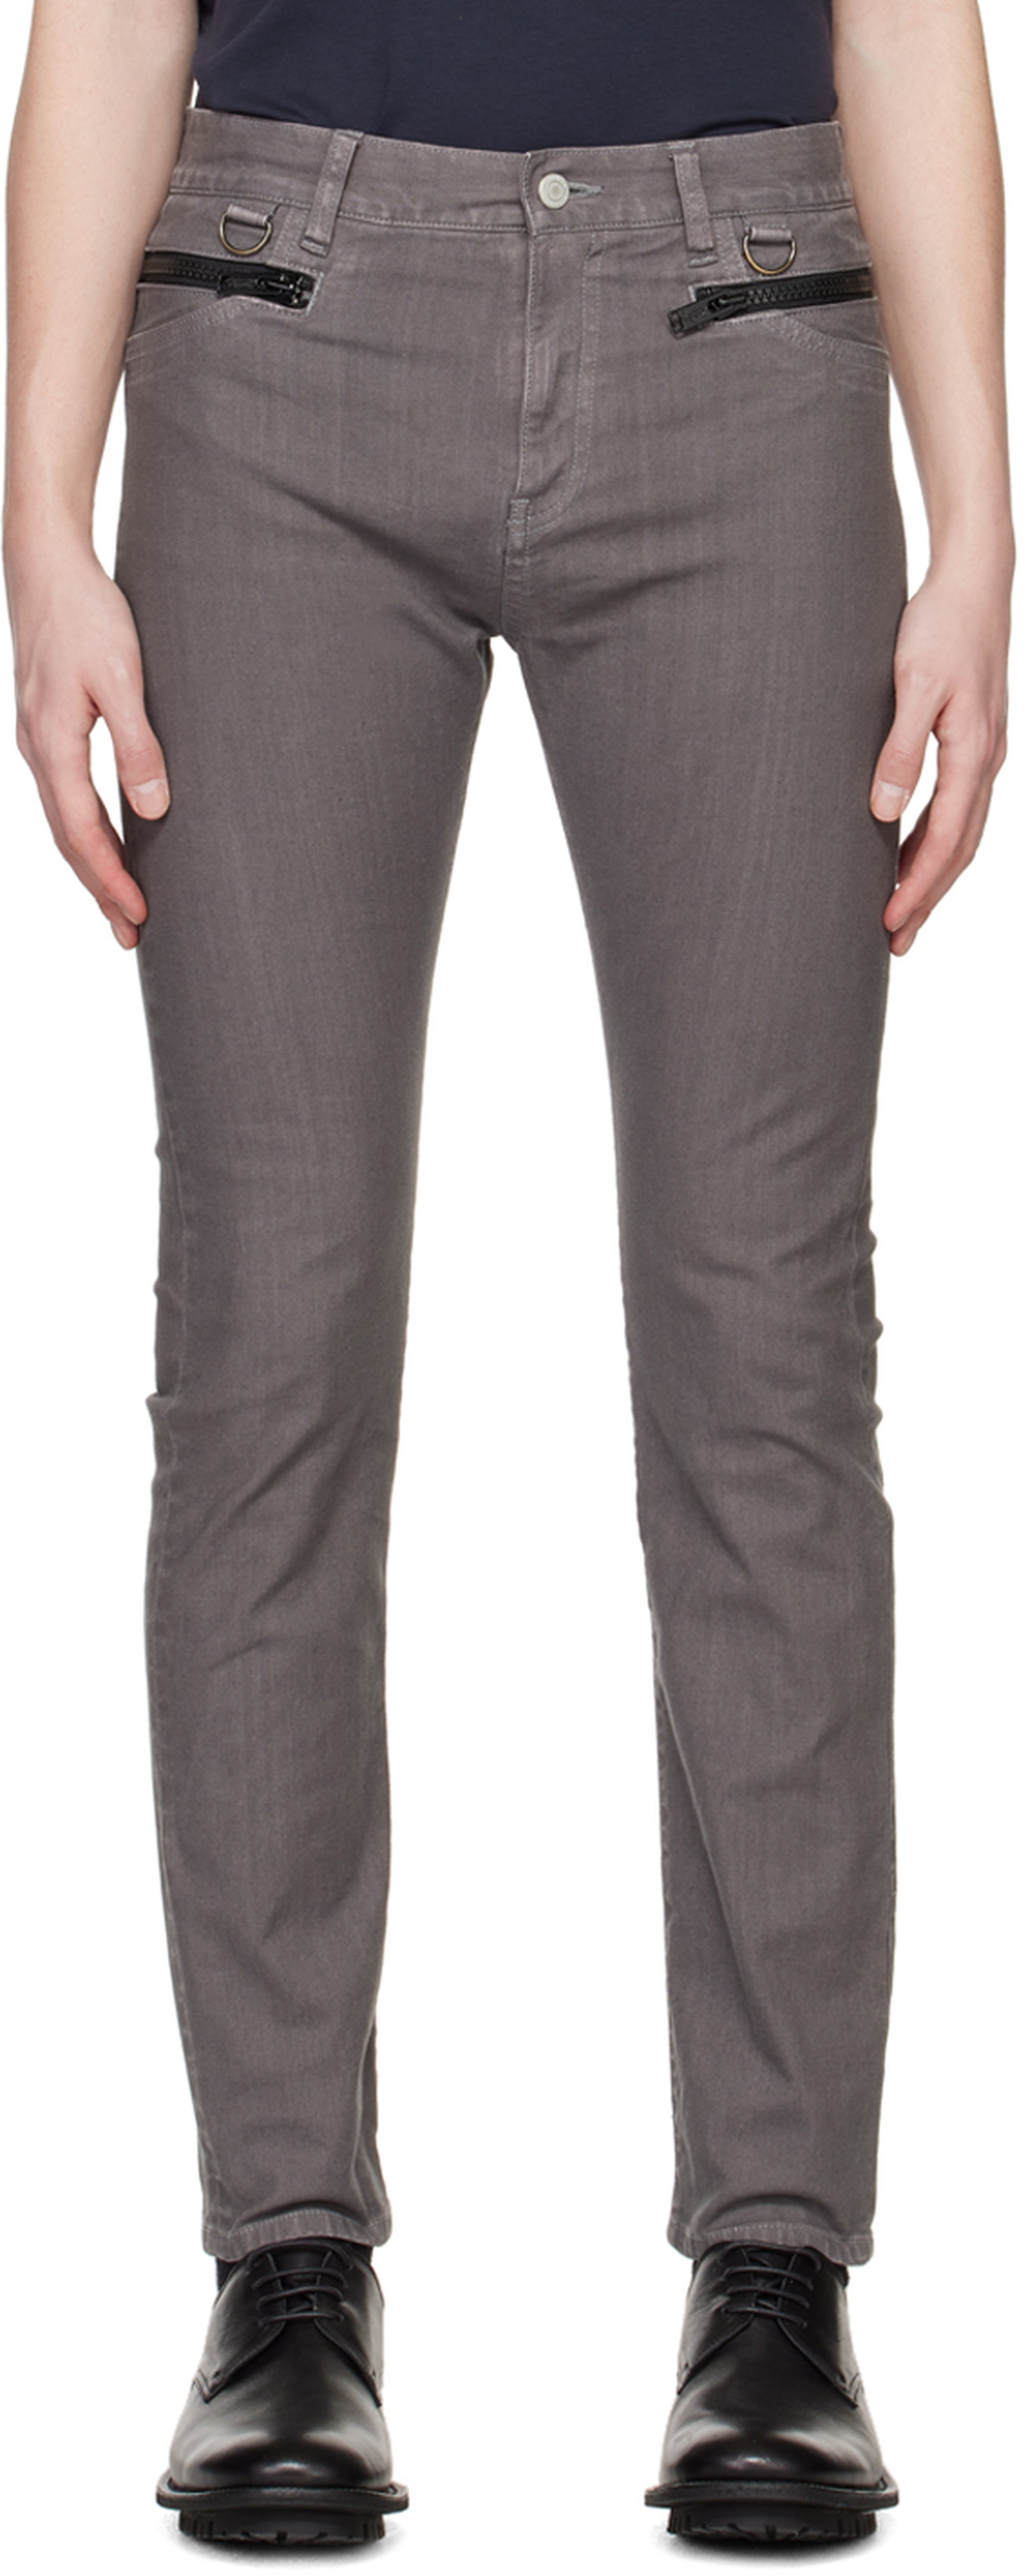 Undercoverism Gray Side Zip Jeans Undercoverism